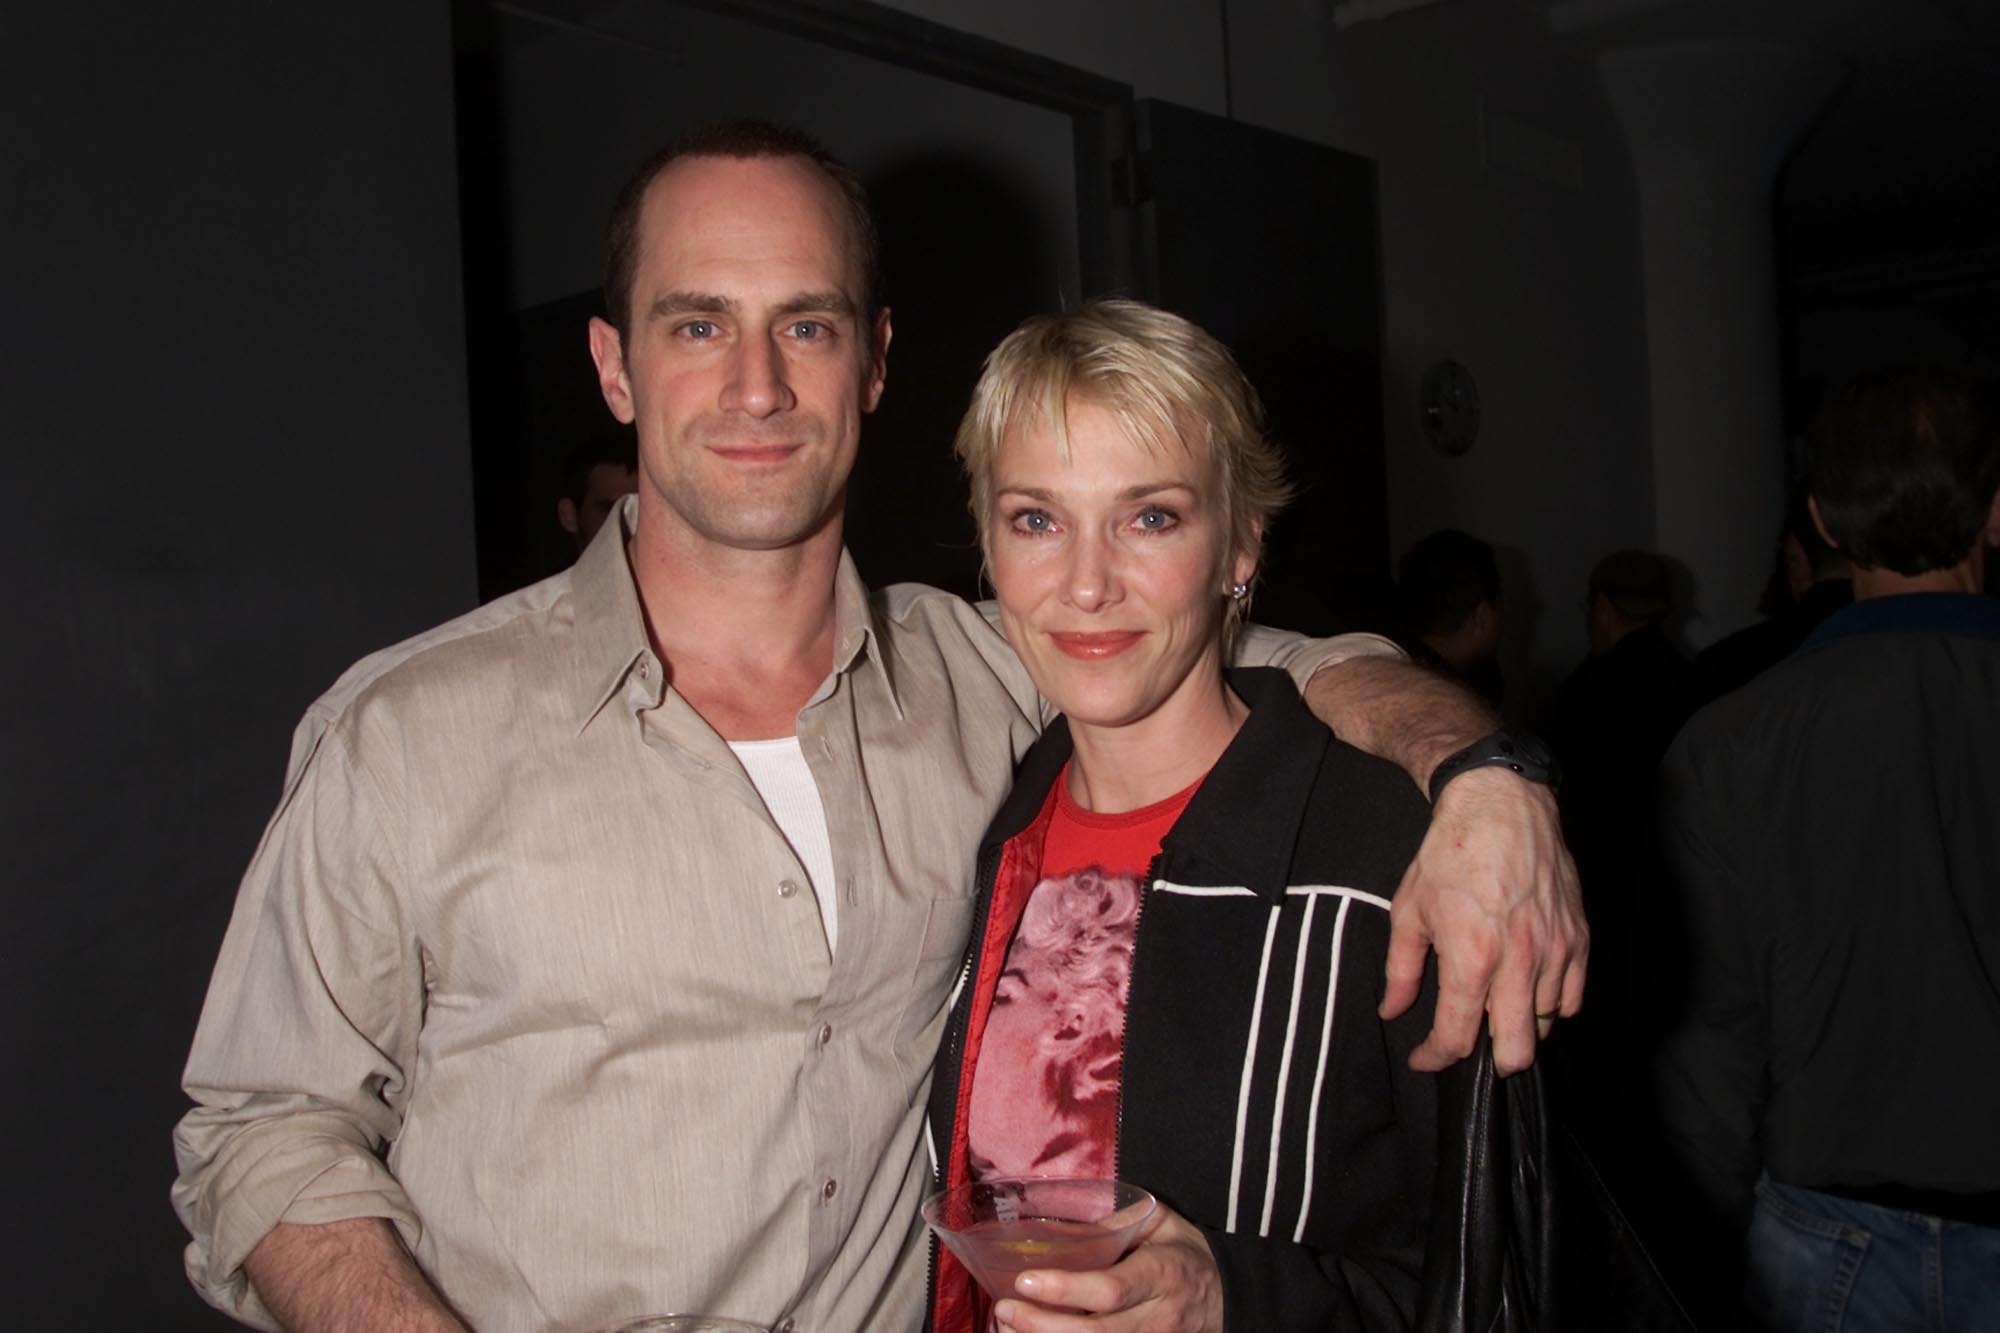 Chris Meloni and Sherman Williams at the launch party for AbsolutDirector.com in New York City on May 22, 2001. | Source: Gabe Palacio/Getty Images